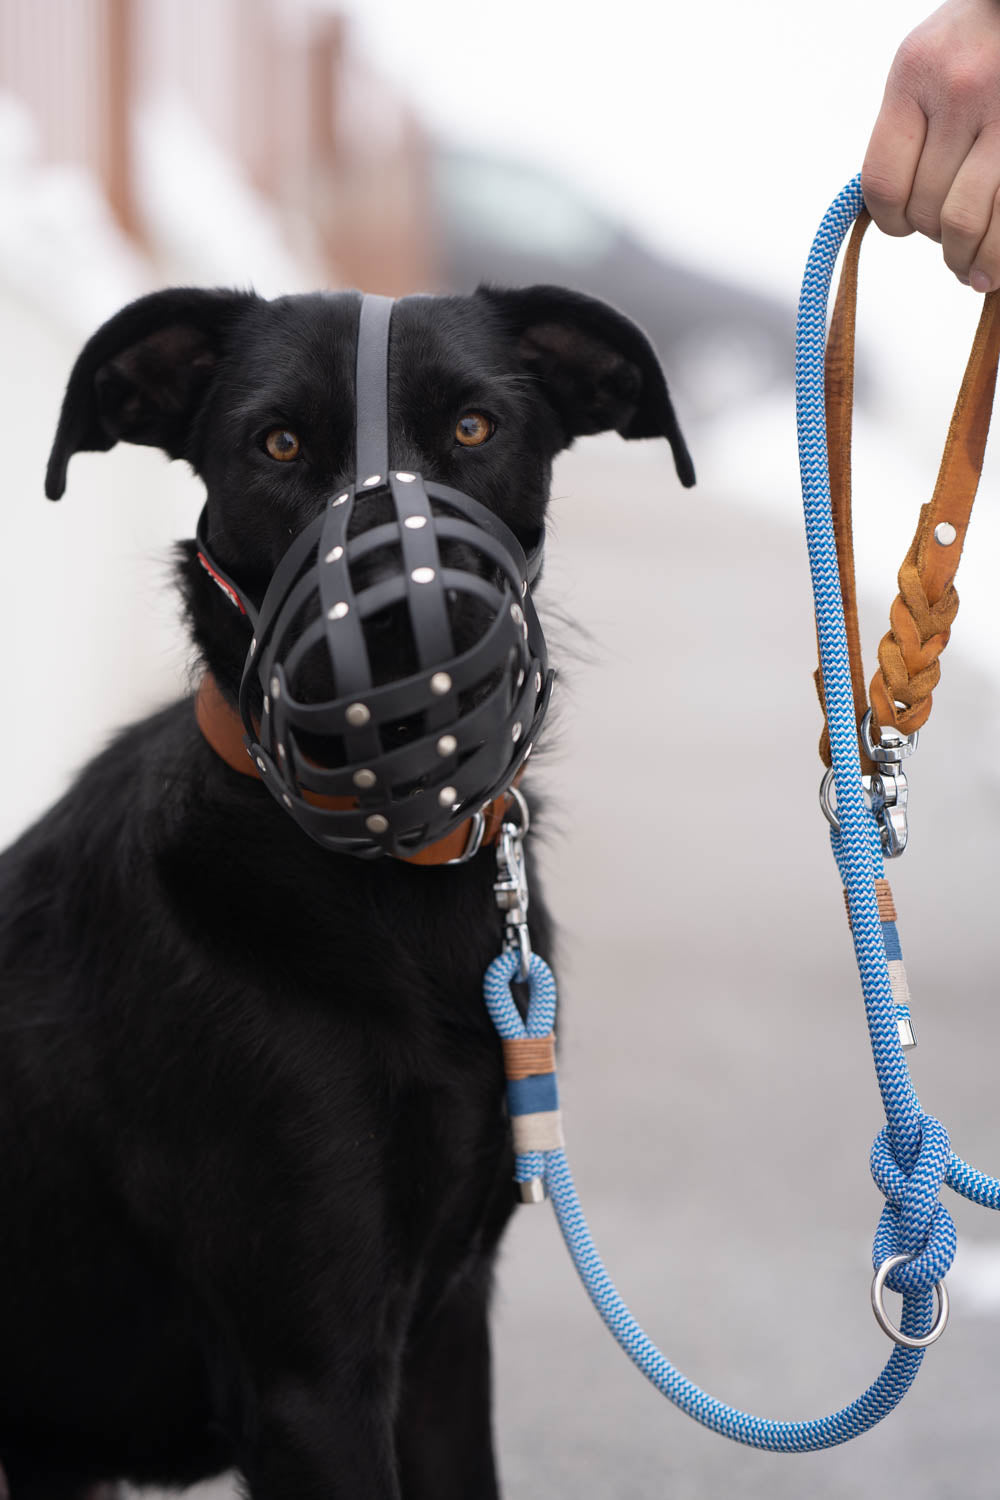 This photo shows a dog with a muzzle. It is part of the blog post 'A Plea for the Muzzle'. The collar and leash are from PAWSOME dog accessories.